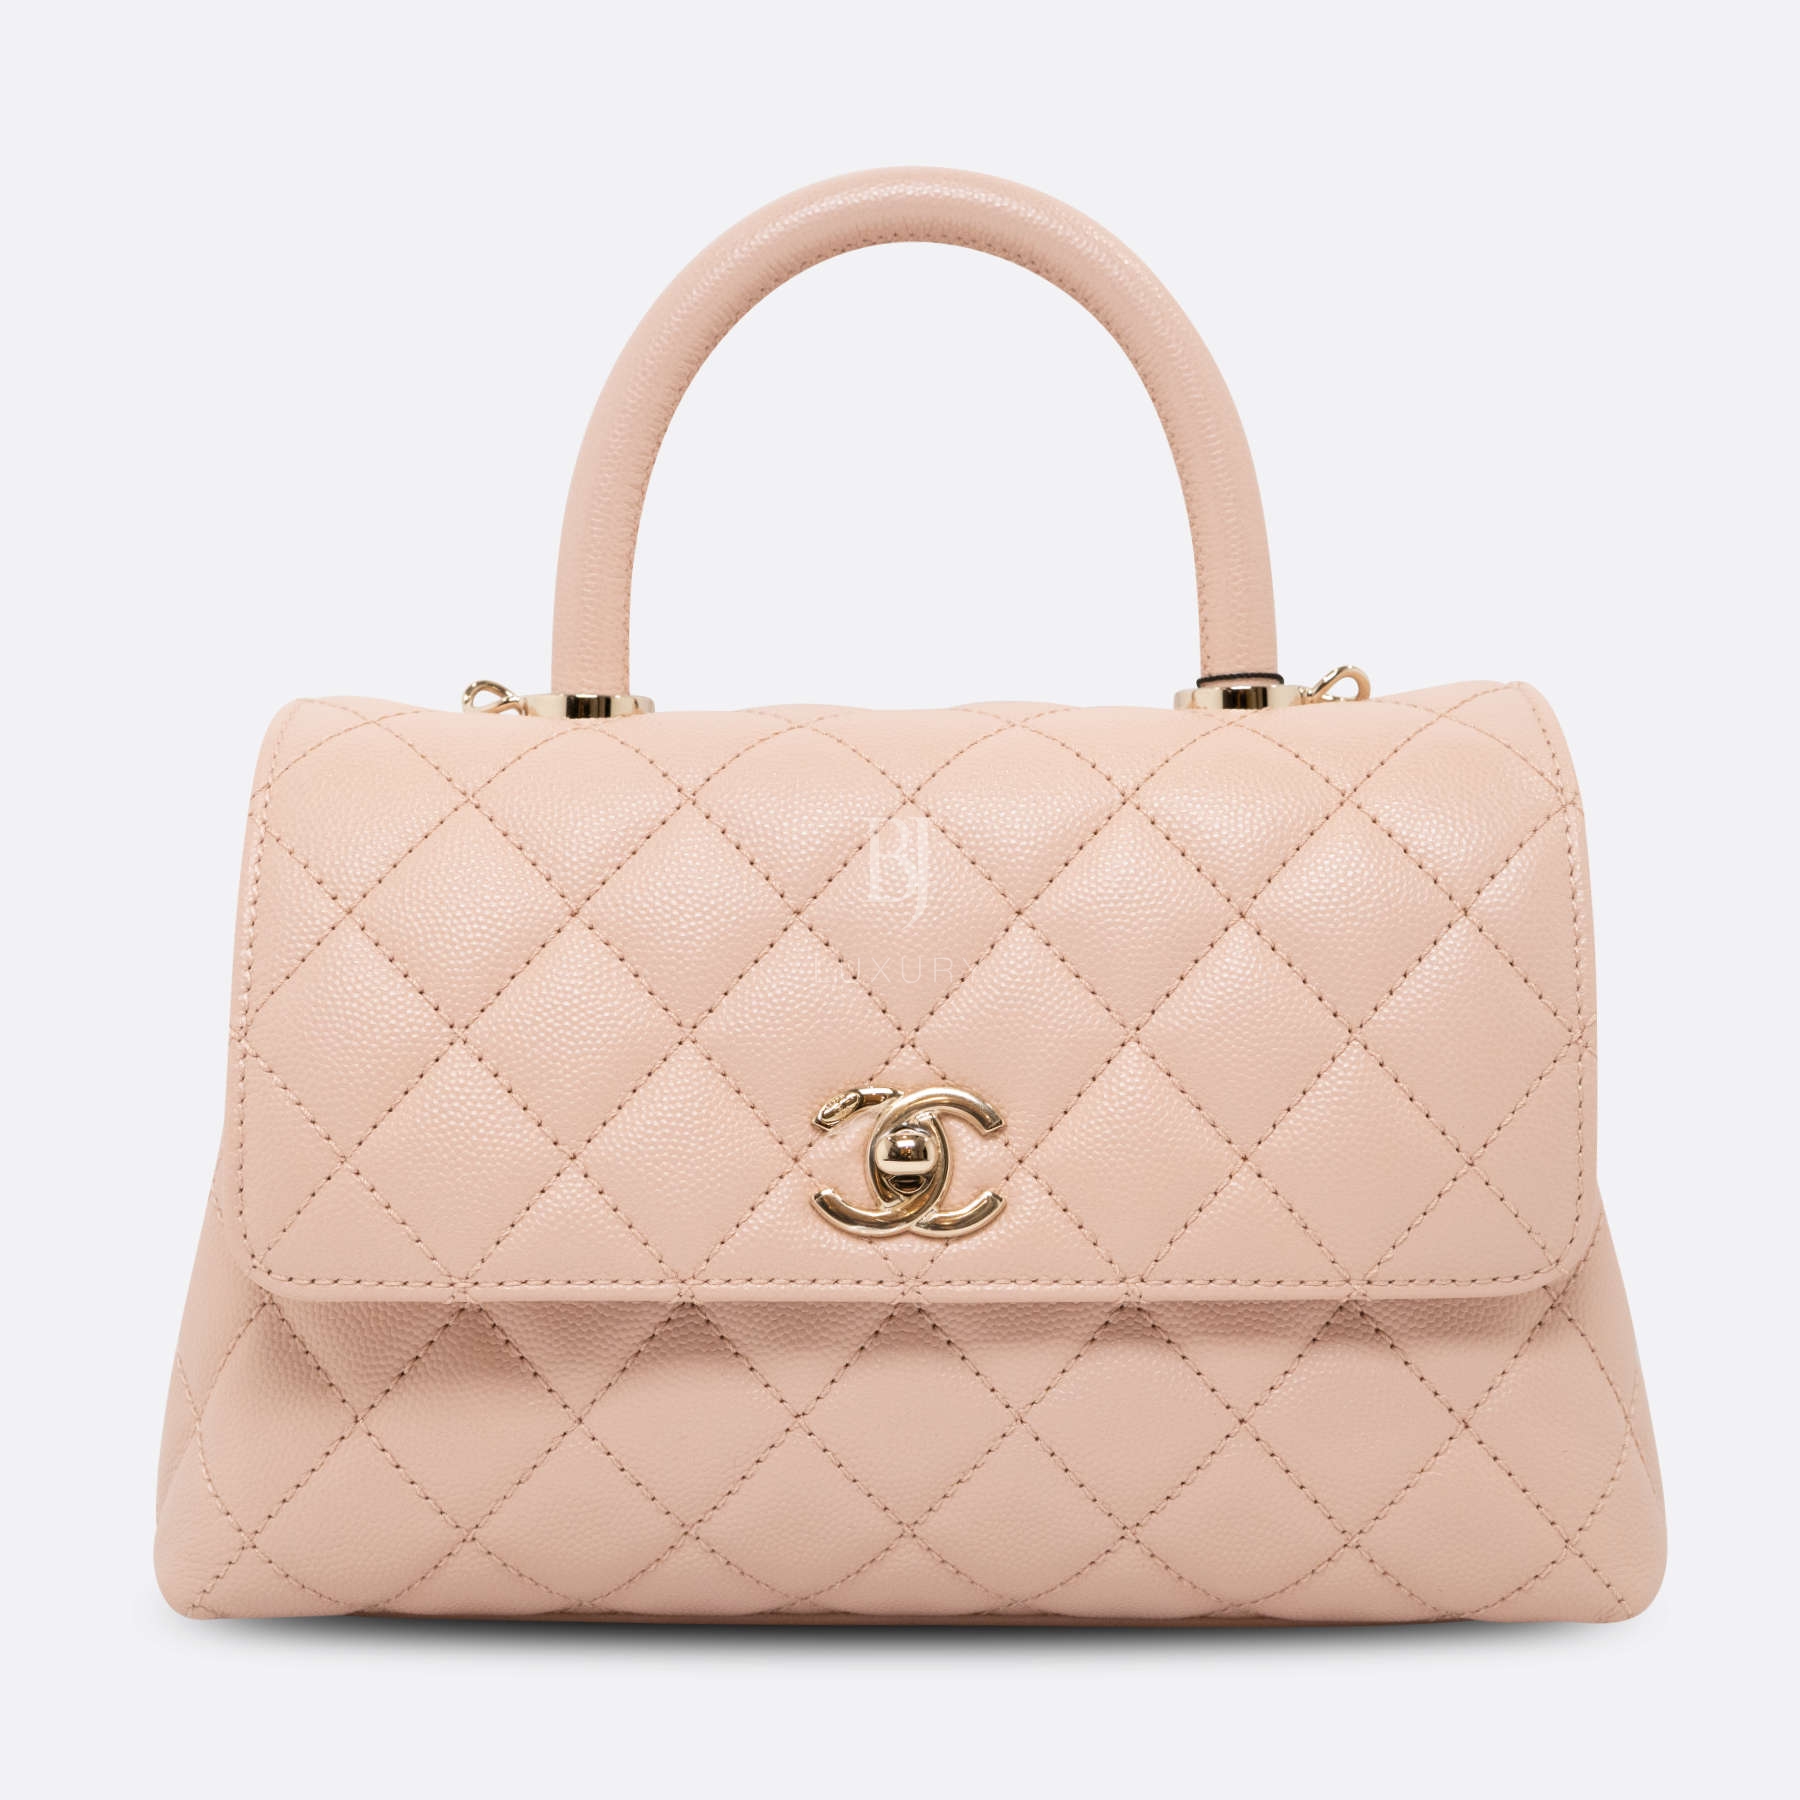 CHANEL-COCOHANDLE-SMALL-ROSE-CAVIAR-4256 front.jpg